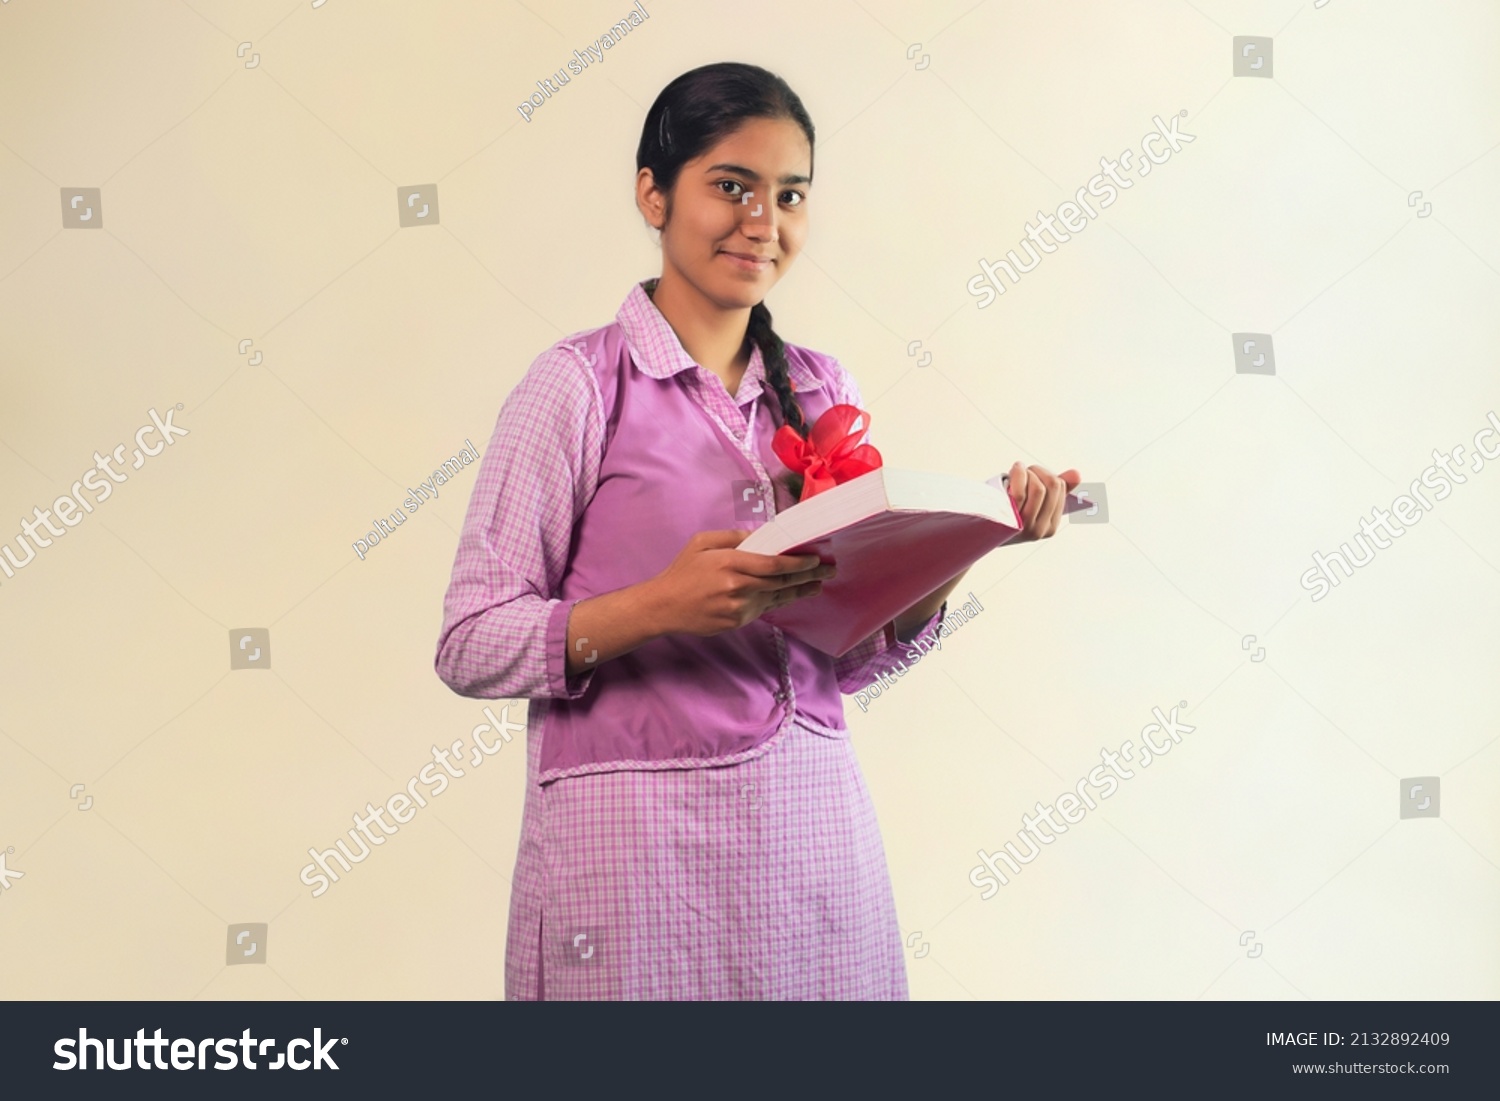 A school girl looking at camera with smile while holding book in her hand #2132892409